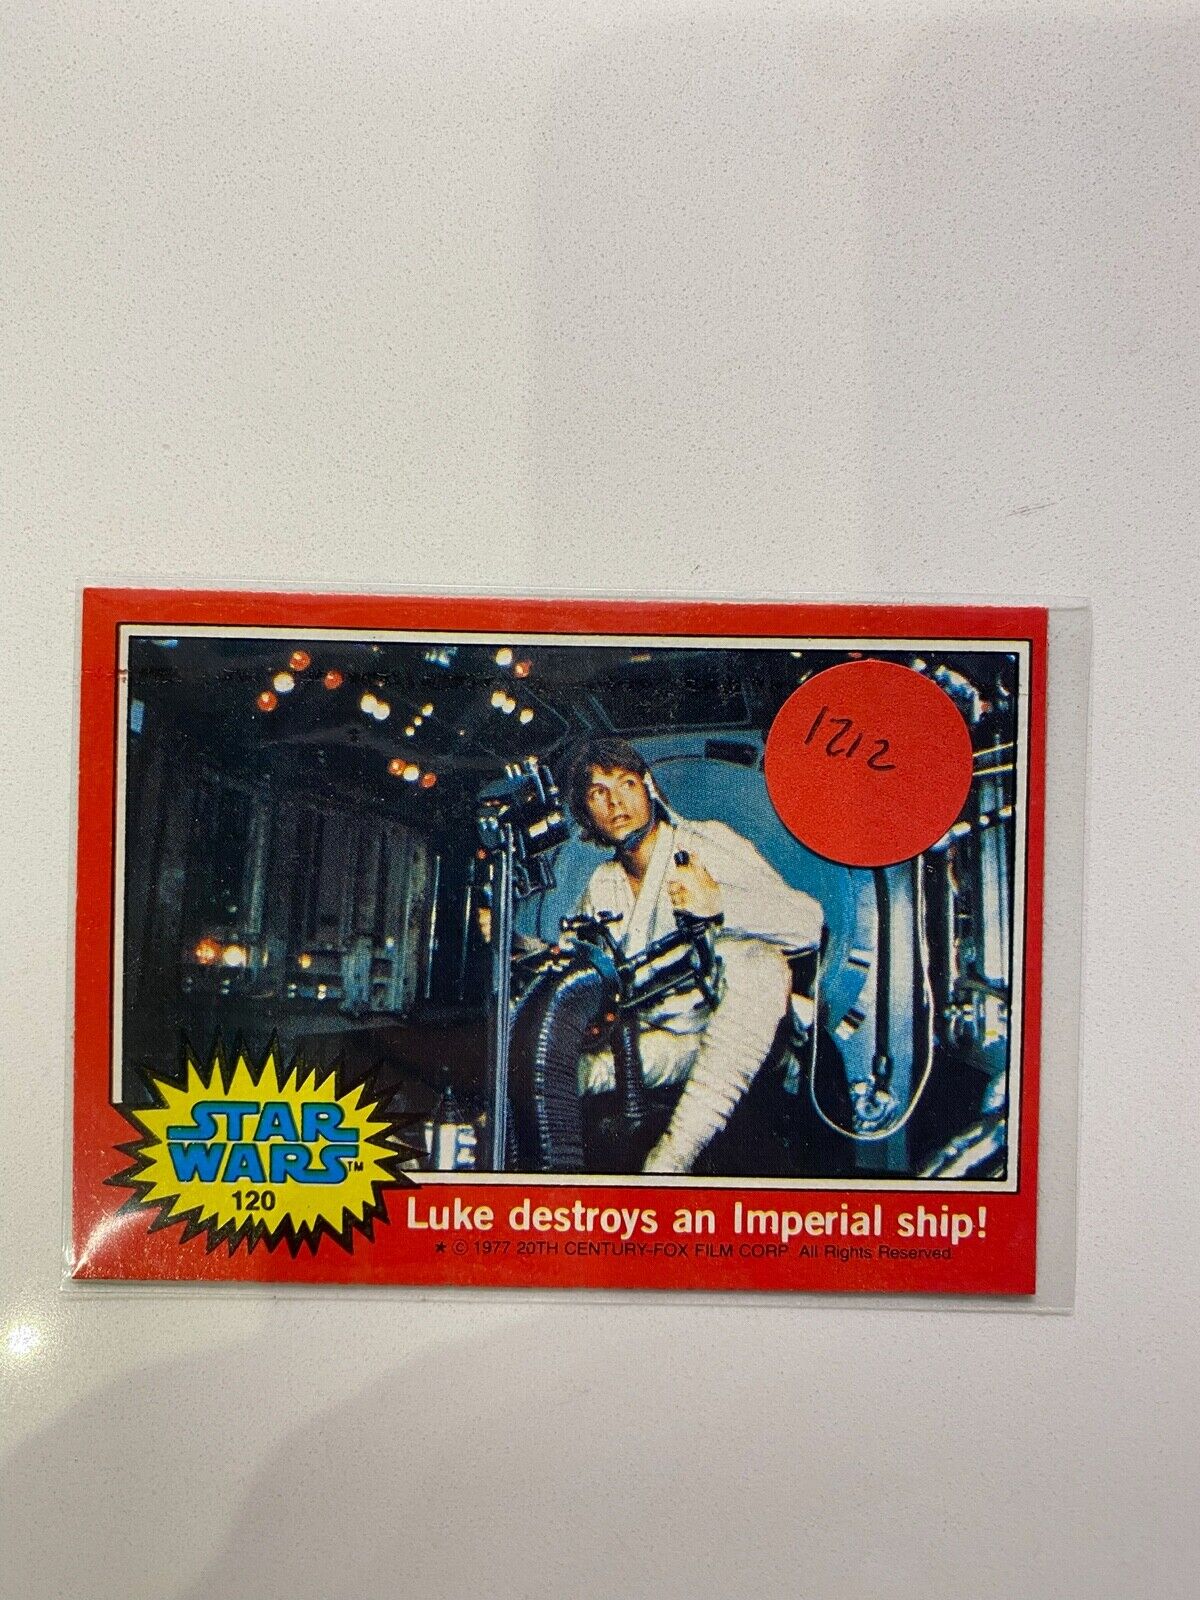 1977 Star Wars Trading Cards Luke destroys an imperial ship